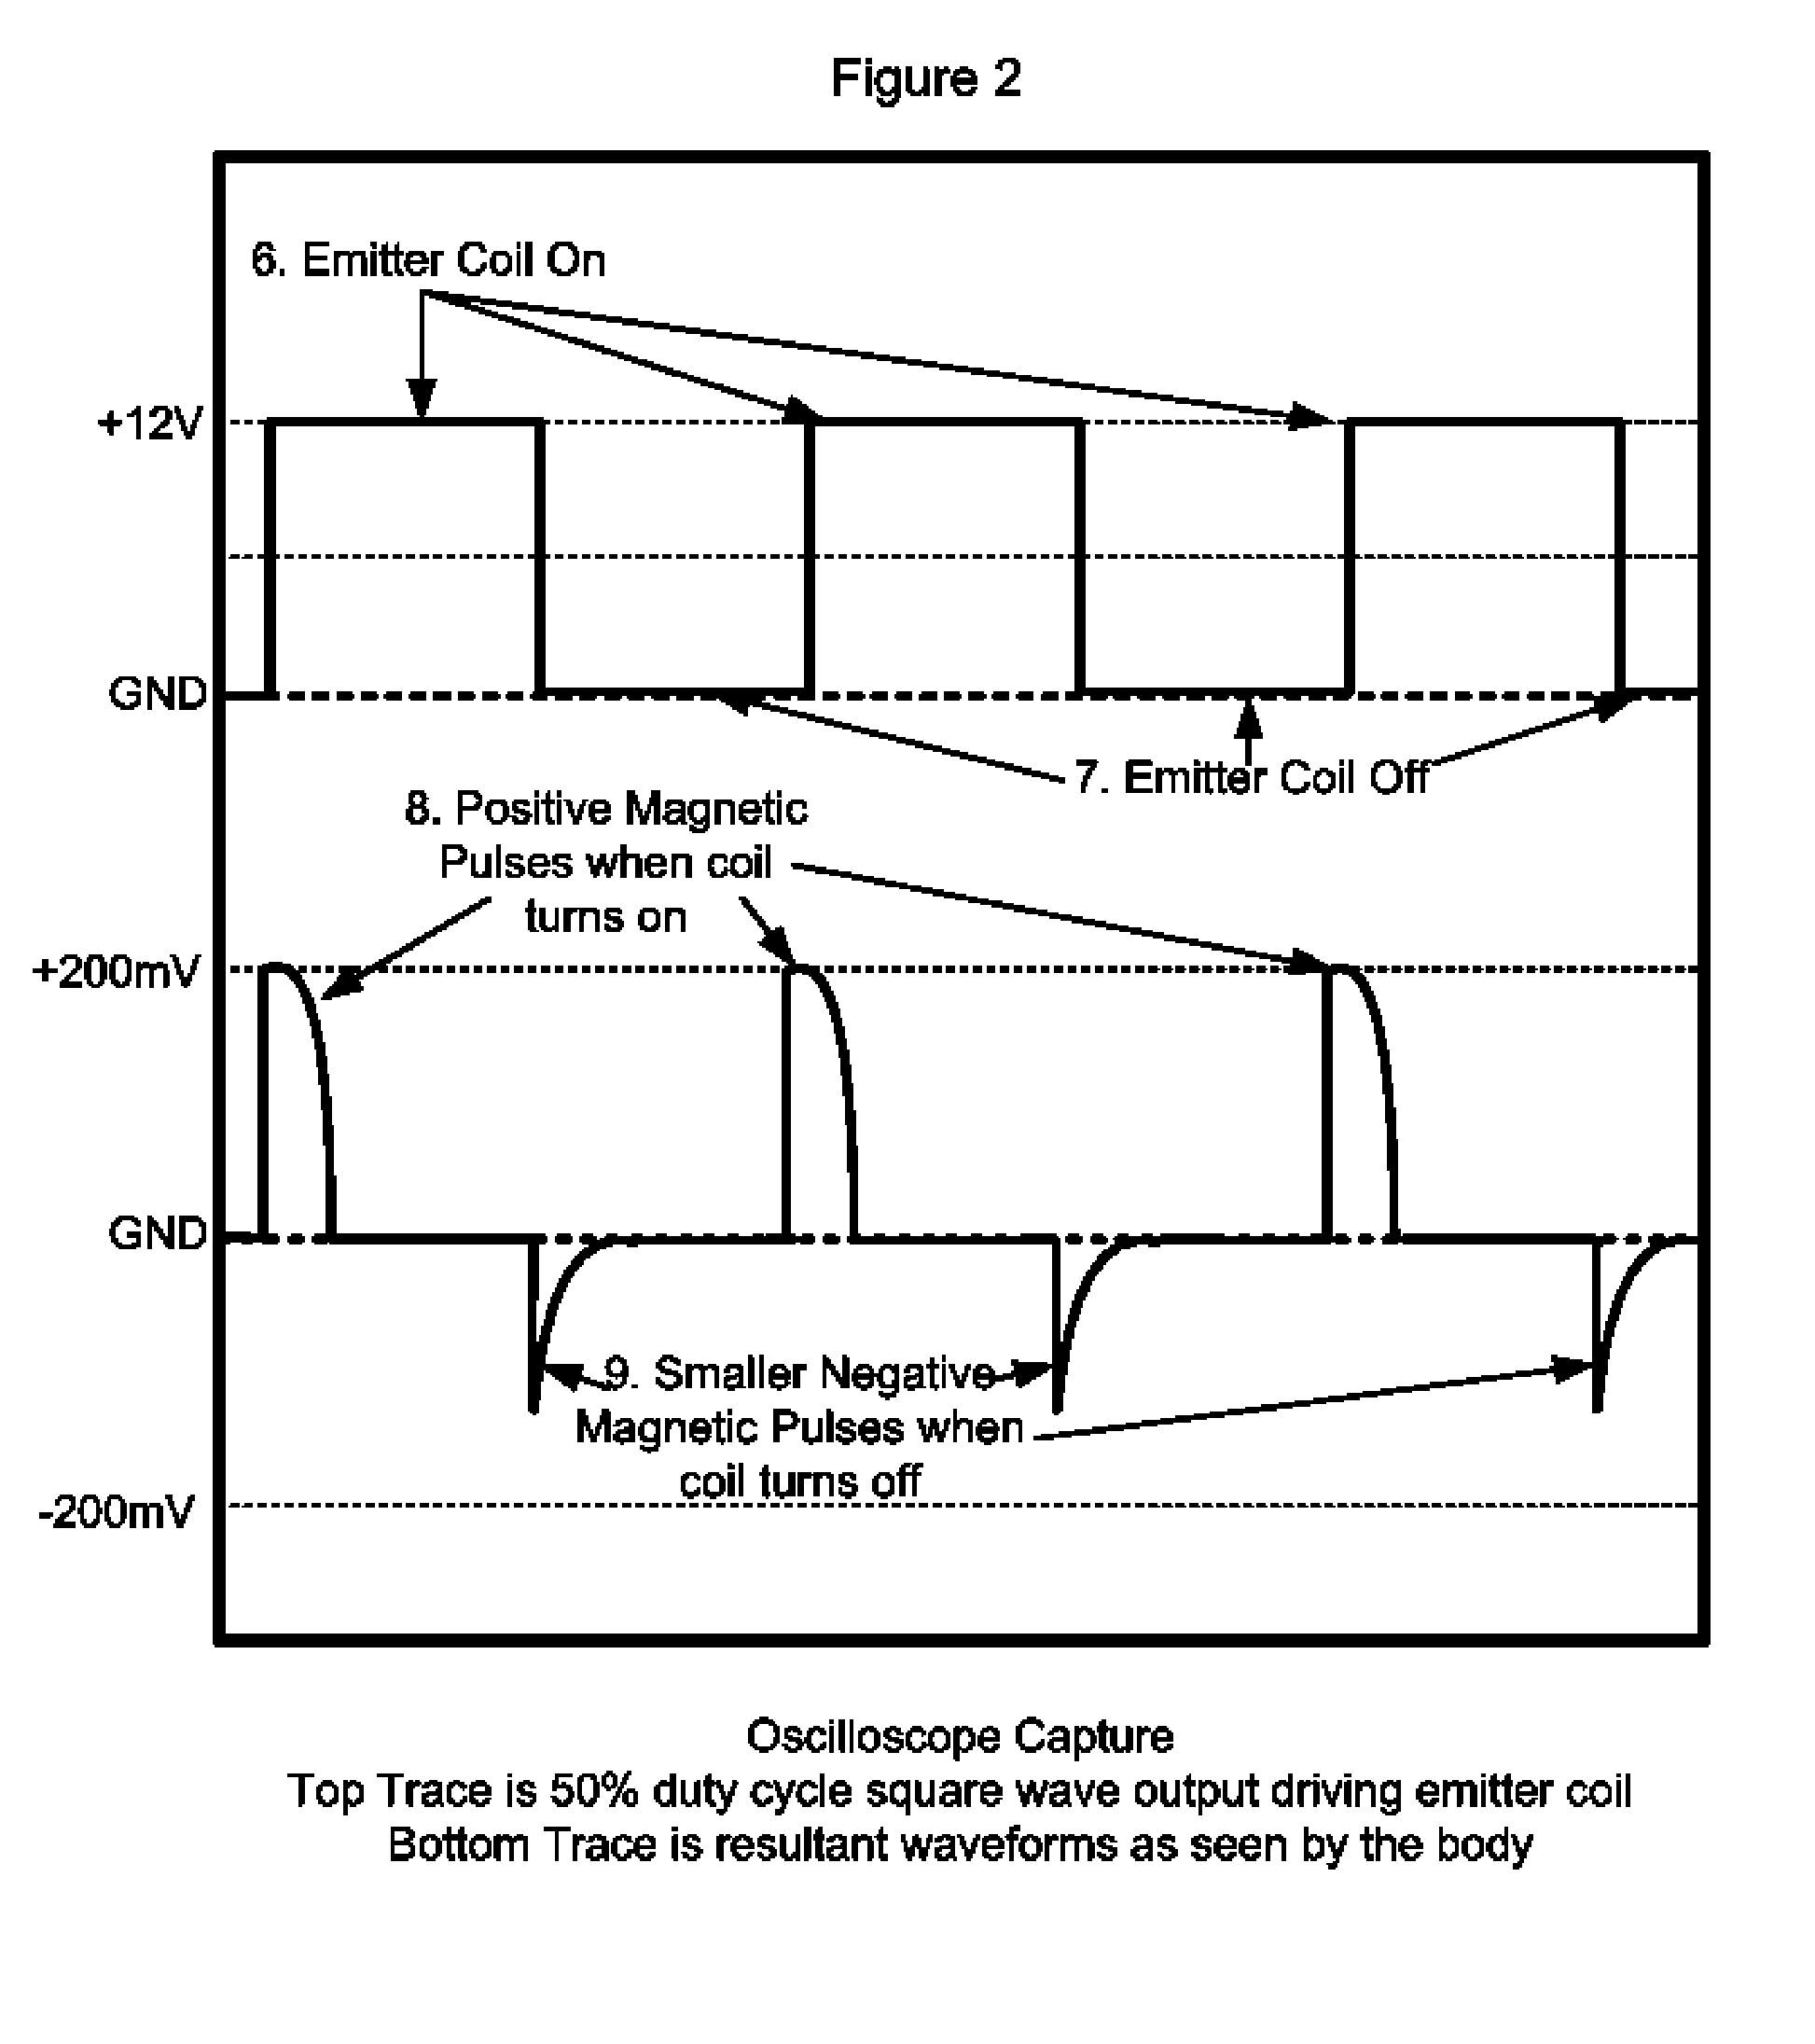 Apparatus and methods to generate circadian rhythm based pulsed electromagnetic fields using micro-watts of electrical energy